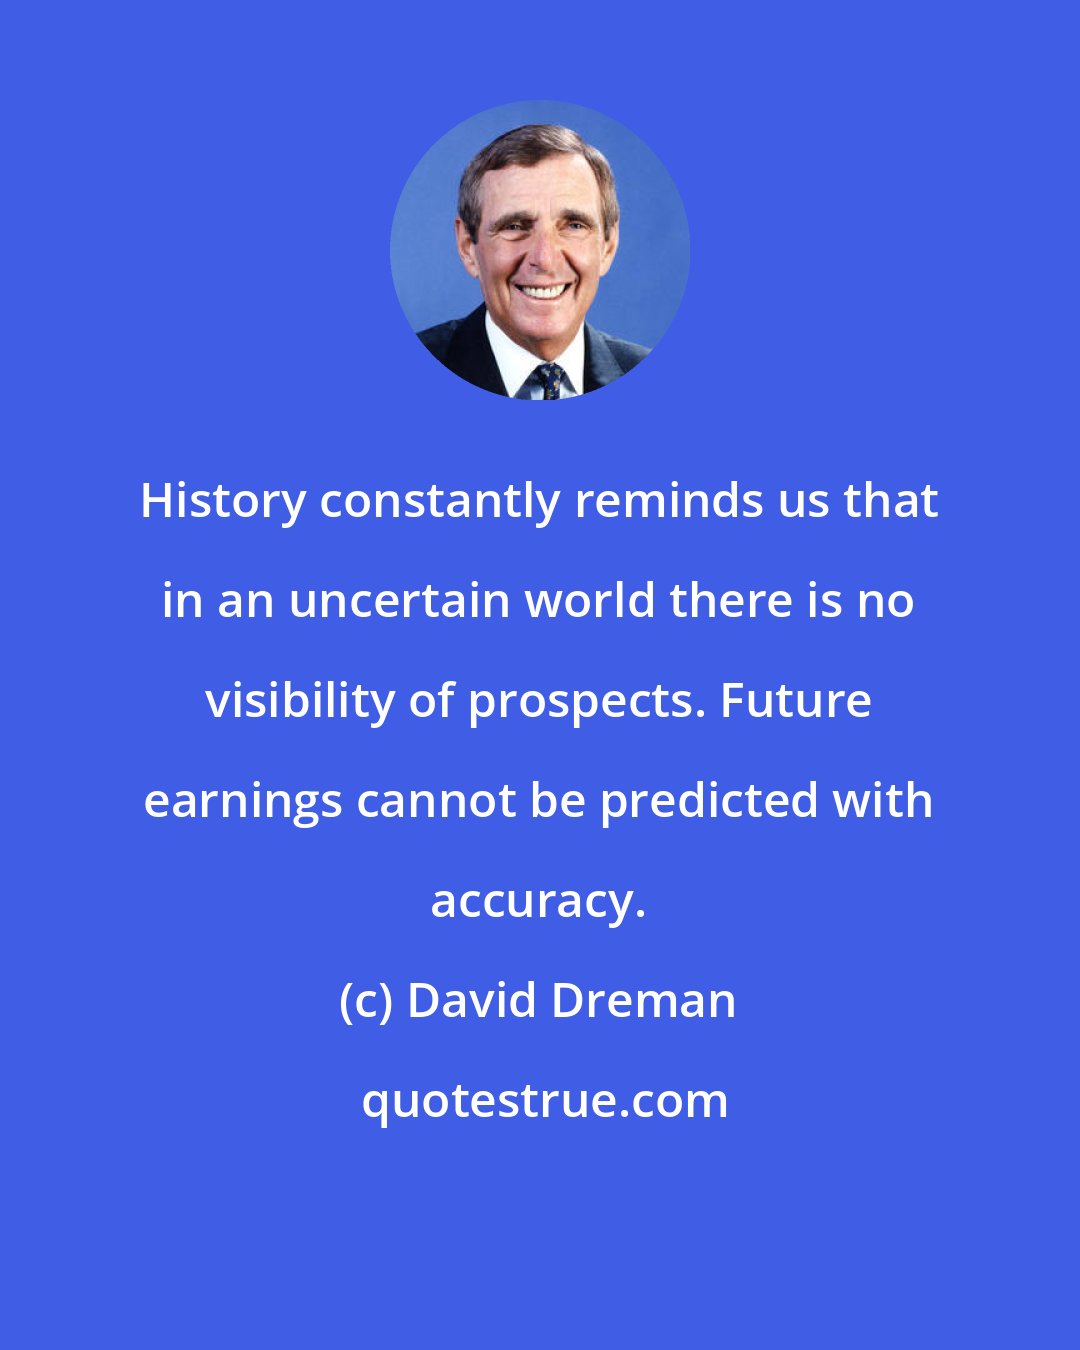 David Dreman: History constantly reminds us that in an uncertain world there is no visibility of prospects. Future earnings cannot be predicted with accuracy.